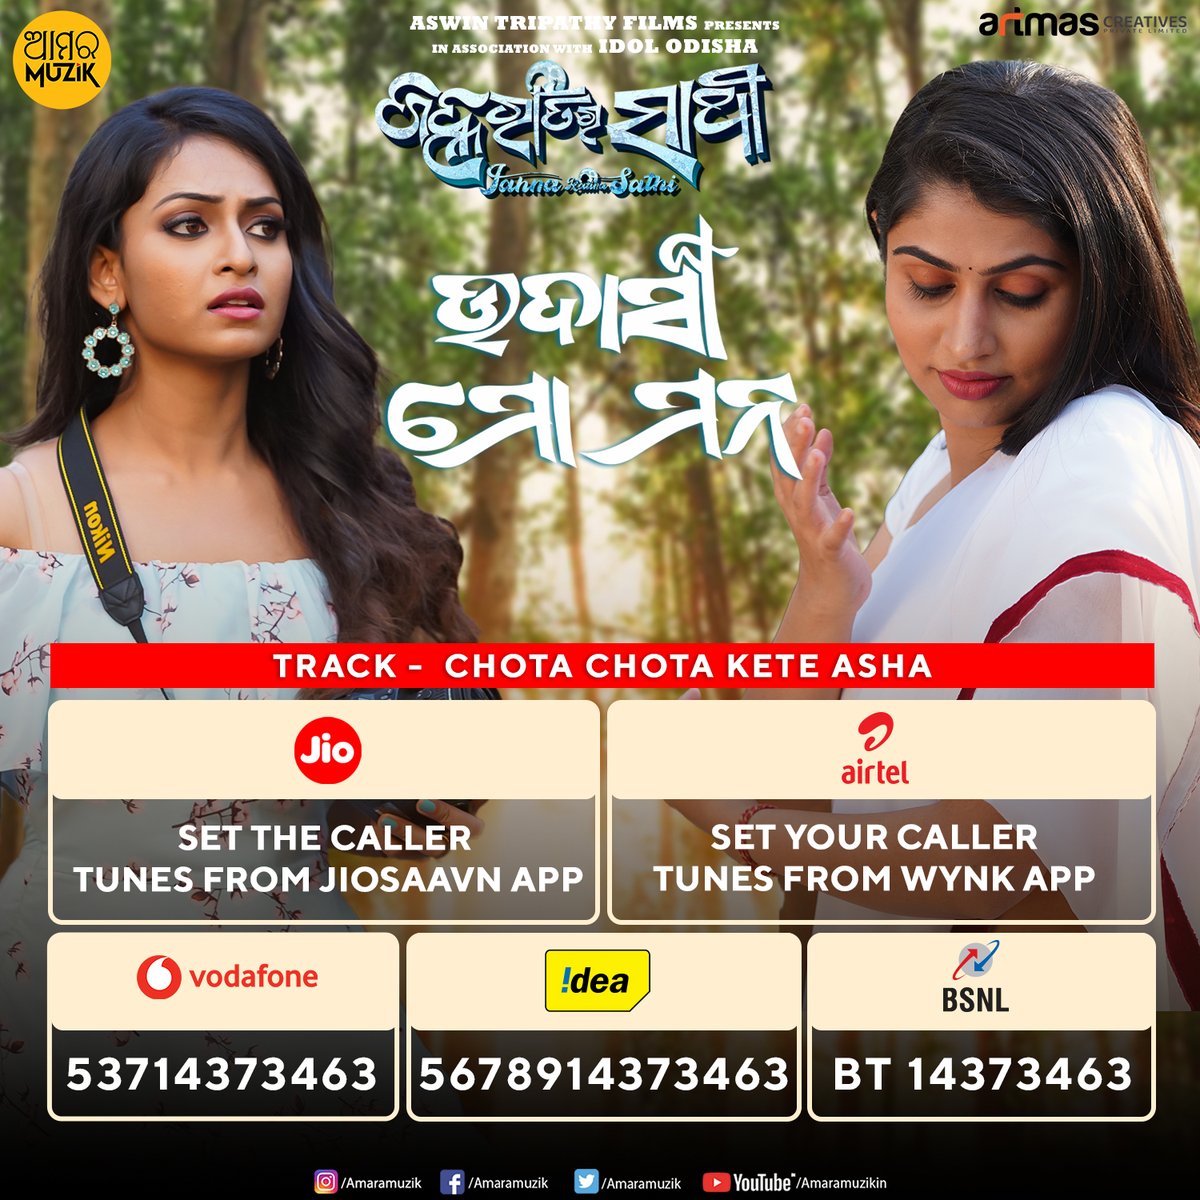 Set #UdasiMoMana as your caller tune > 
Airtel users can set your caller tunes from Wynk app
Jio users can set the caller tunes from JioSaavn
Vodafone Users : Dial 537 14373463
Idea Users : Dial 56789 14373463
Bsnl Users : SMS BT 14373463 to 56700

#JanhaRatiraSathi #AmaraMuzik